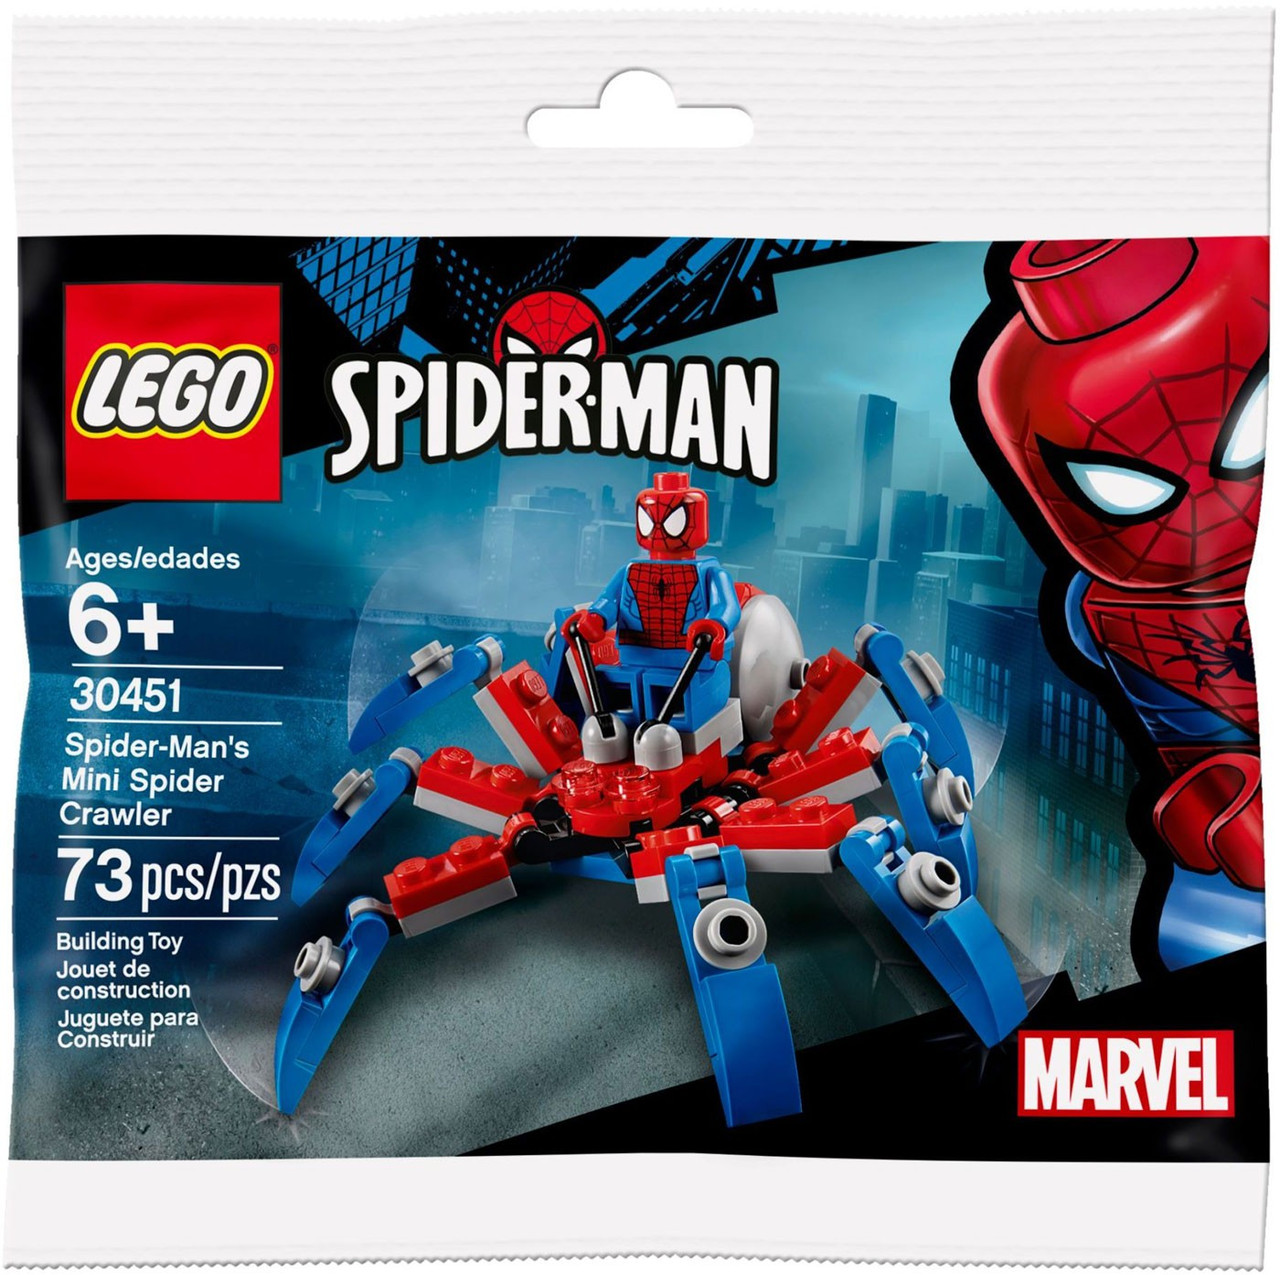 spiderman lego far from home sets